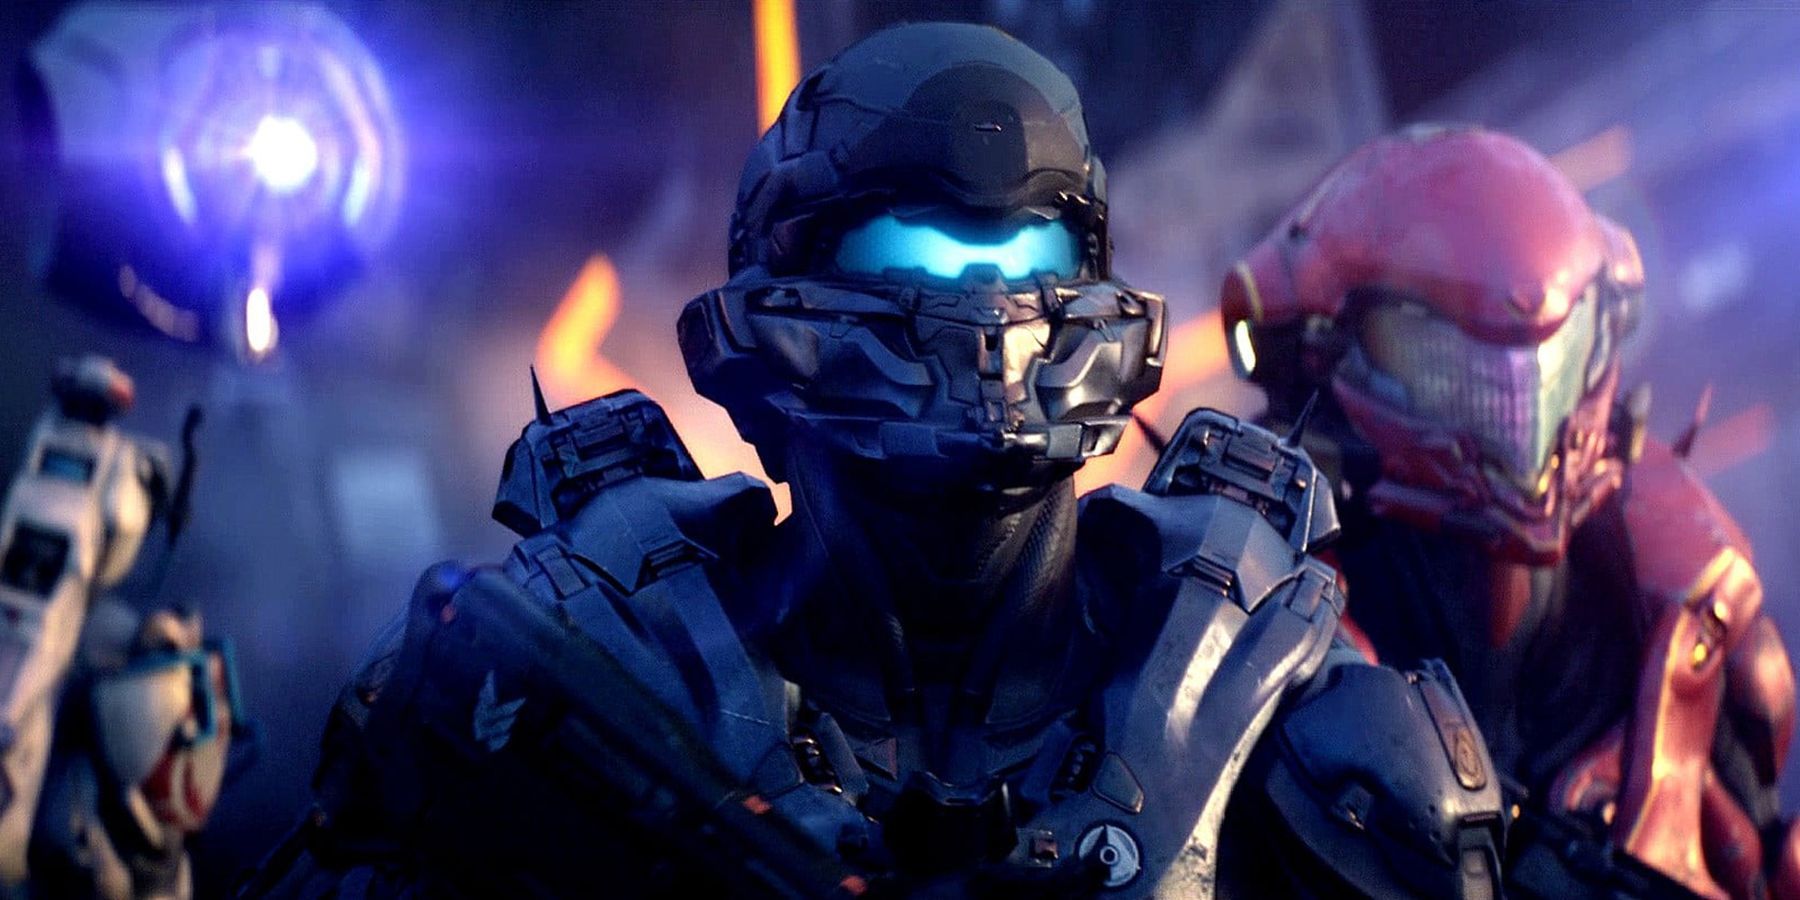 Master Chief is the star of Halo 5, sorry Agent Locke - Polygon